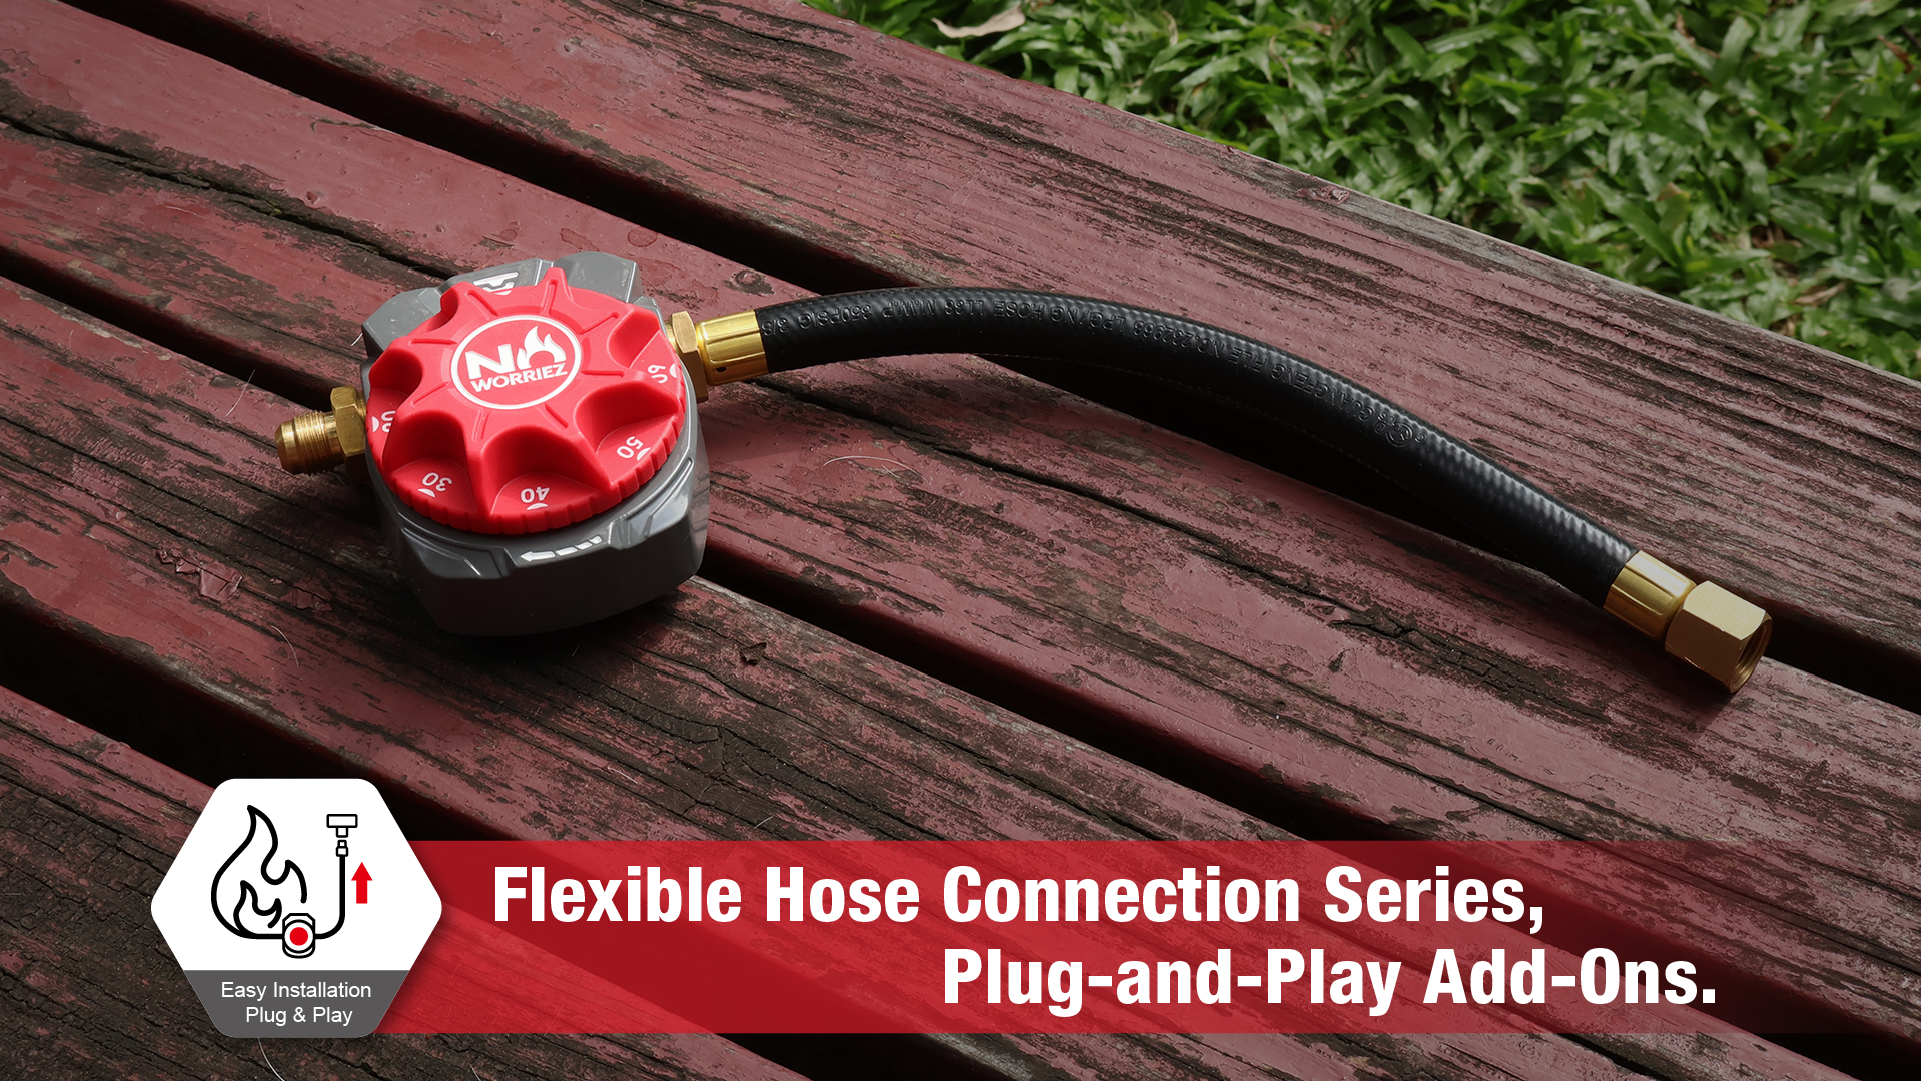 Original Gas timer flexible hose connection series plug-and-play add-ons